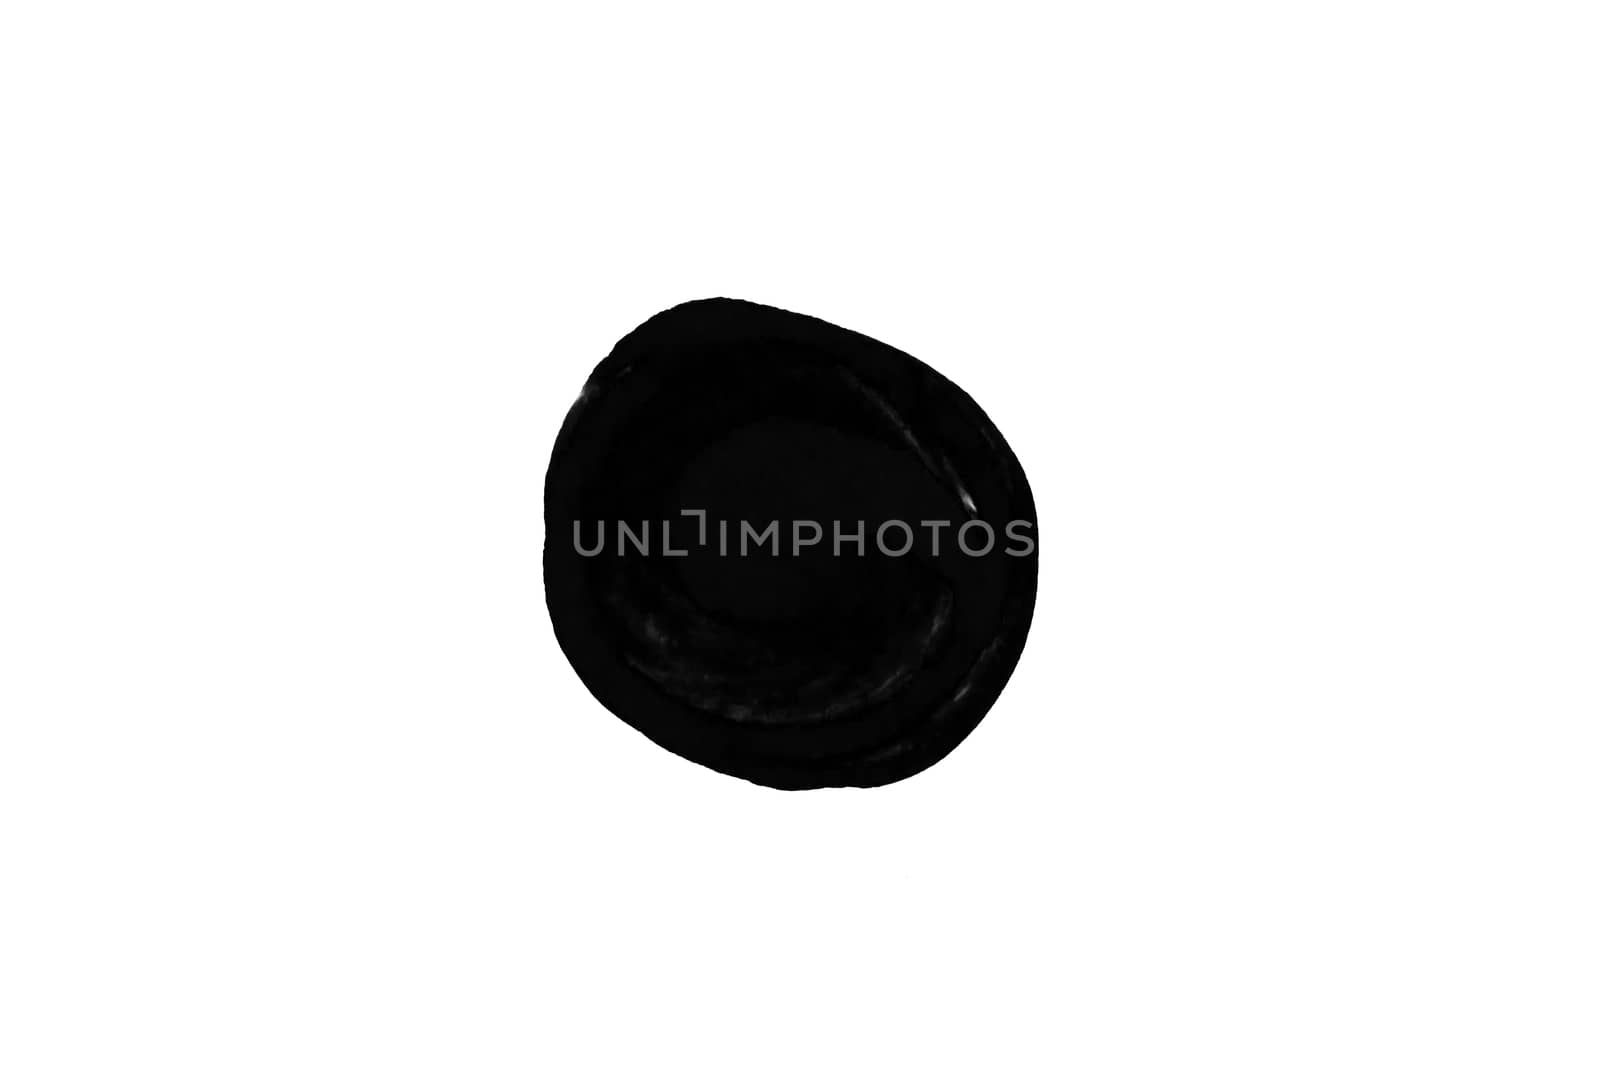 Abstract Ink splash circle isolate on white background